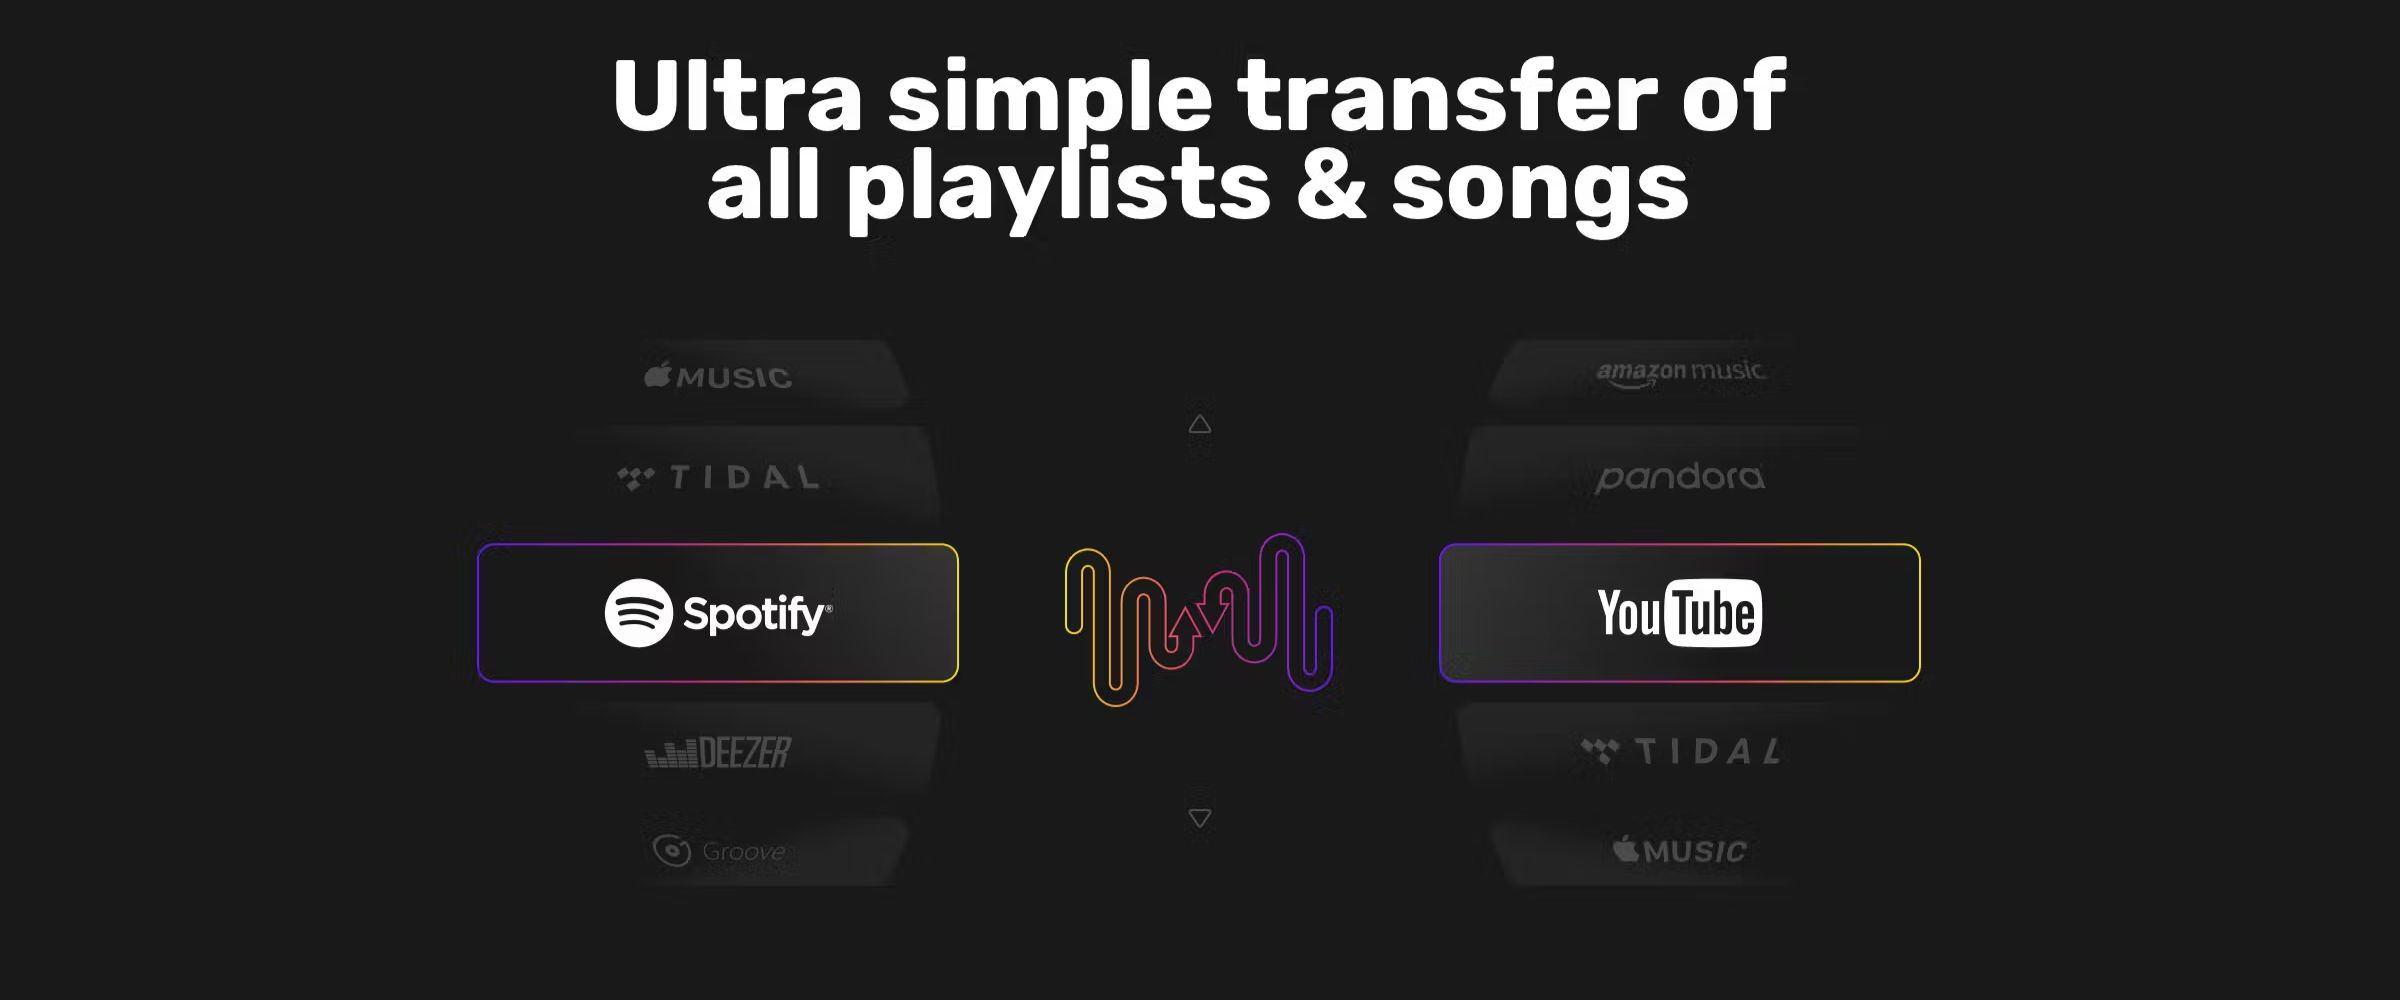 How To Transfer Playlist From Amazon Music To Spotify